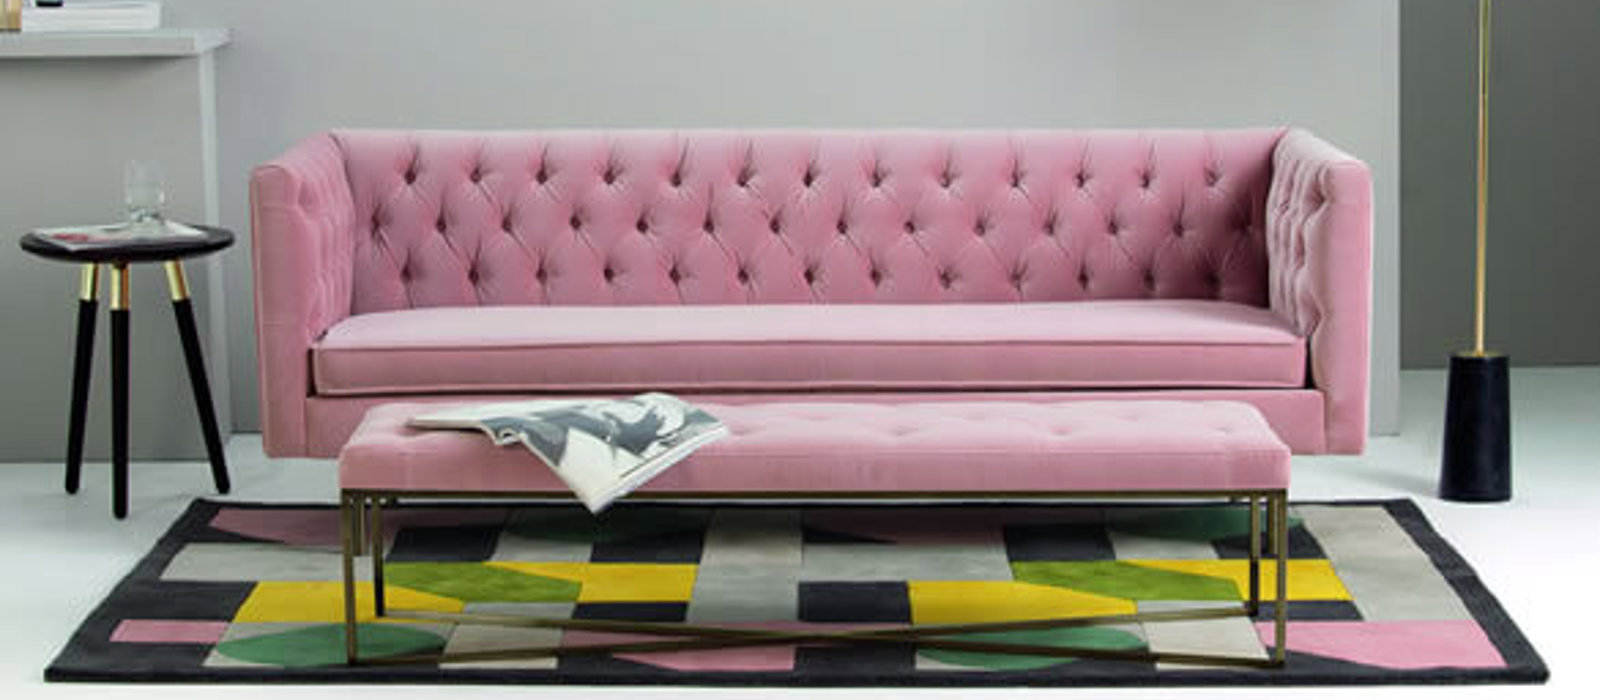 Pink statement sofa in a living room